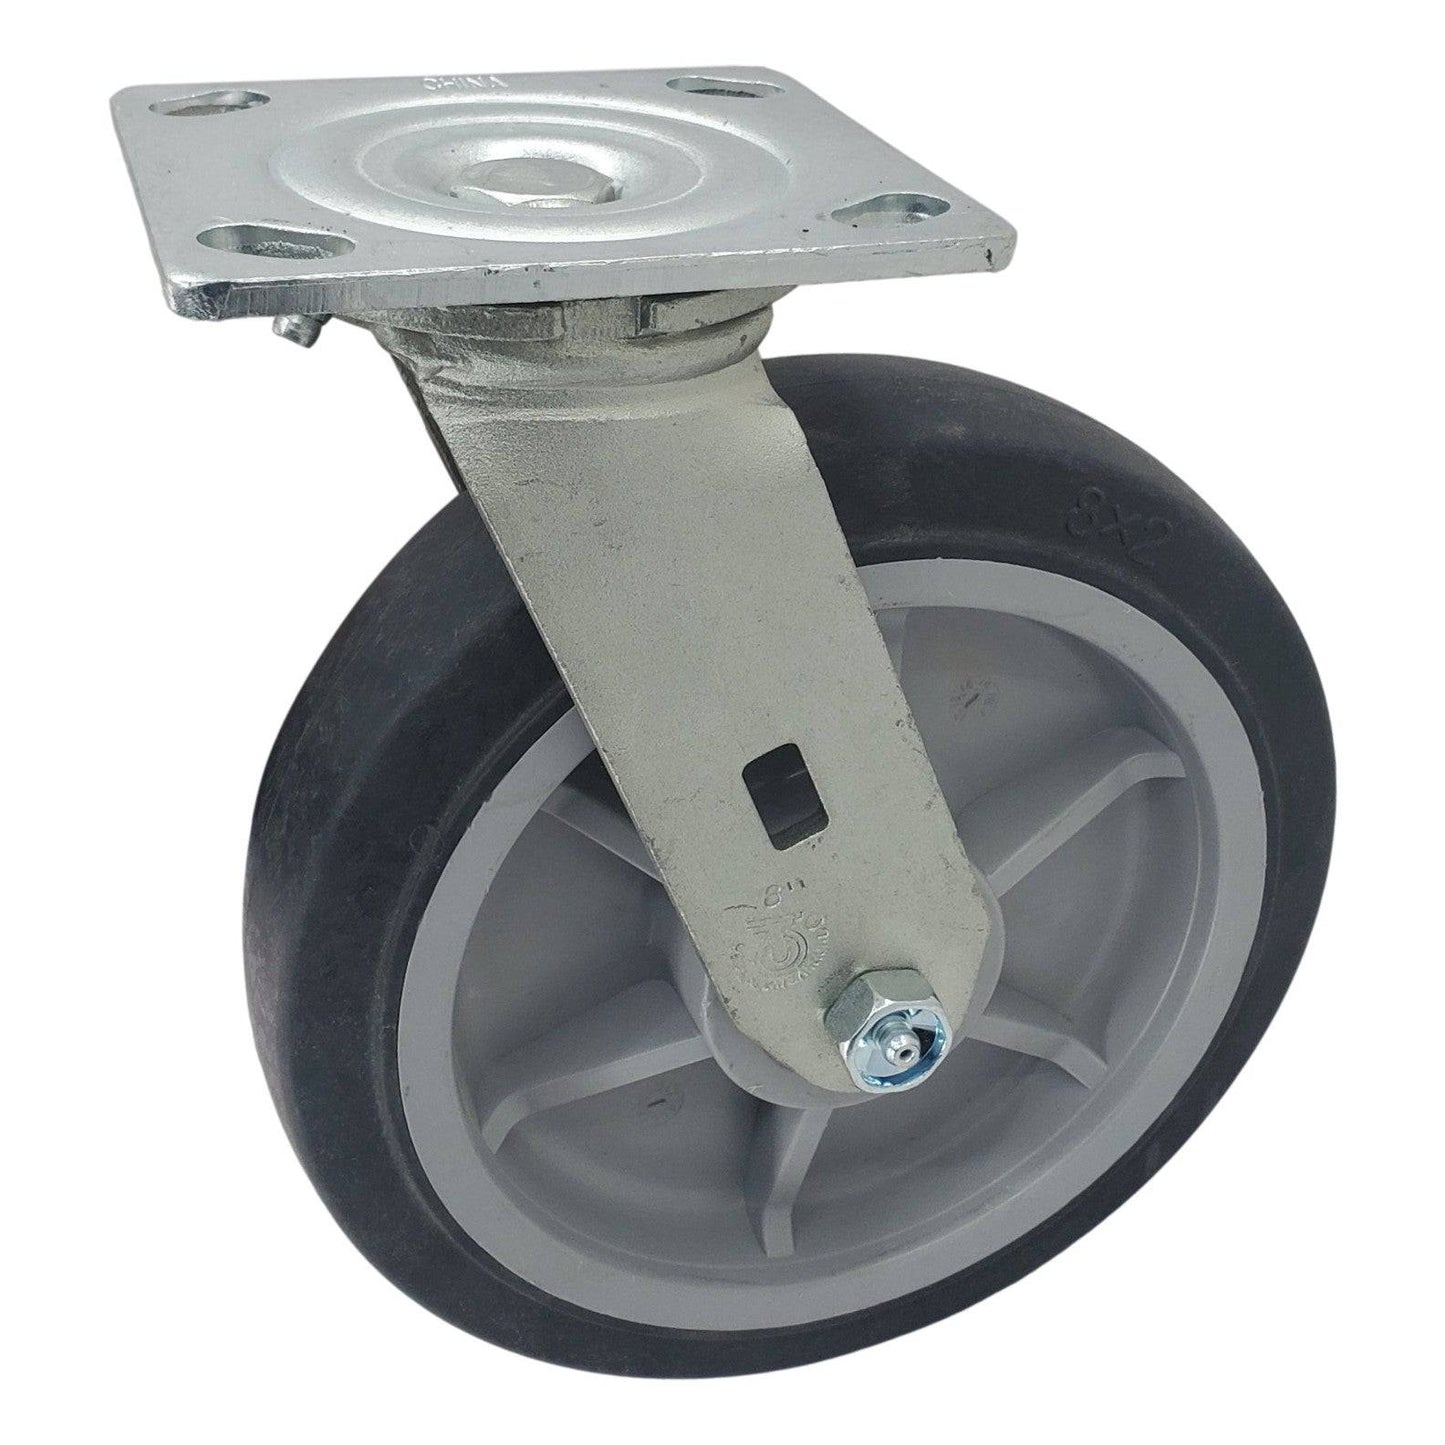 8" x 2" Nomadic Wheel Swivel Caster - 700 lbs. capacity - Durable Superior Casters